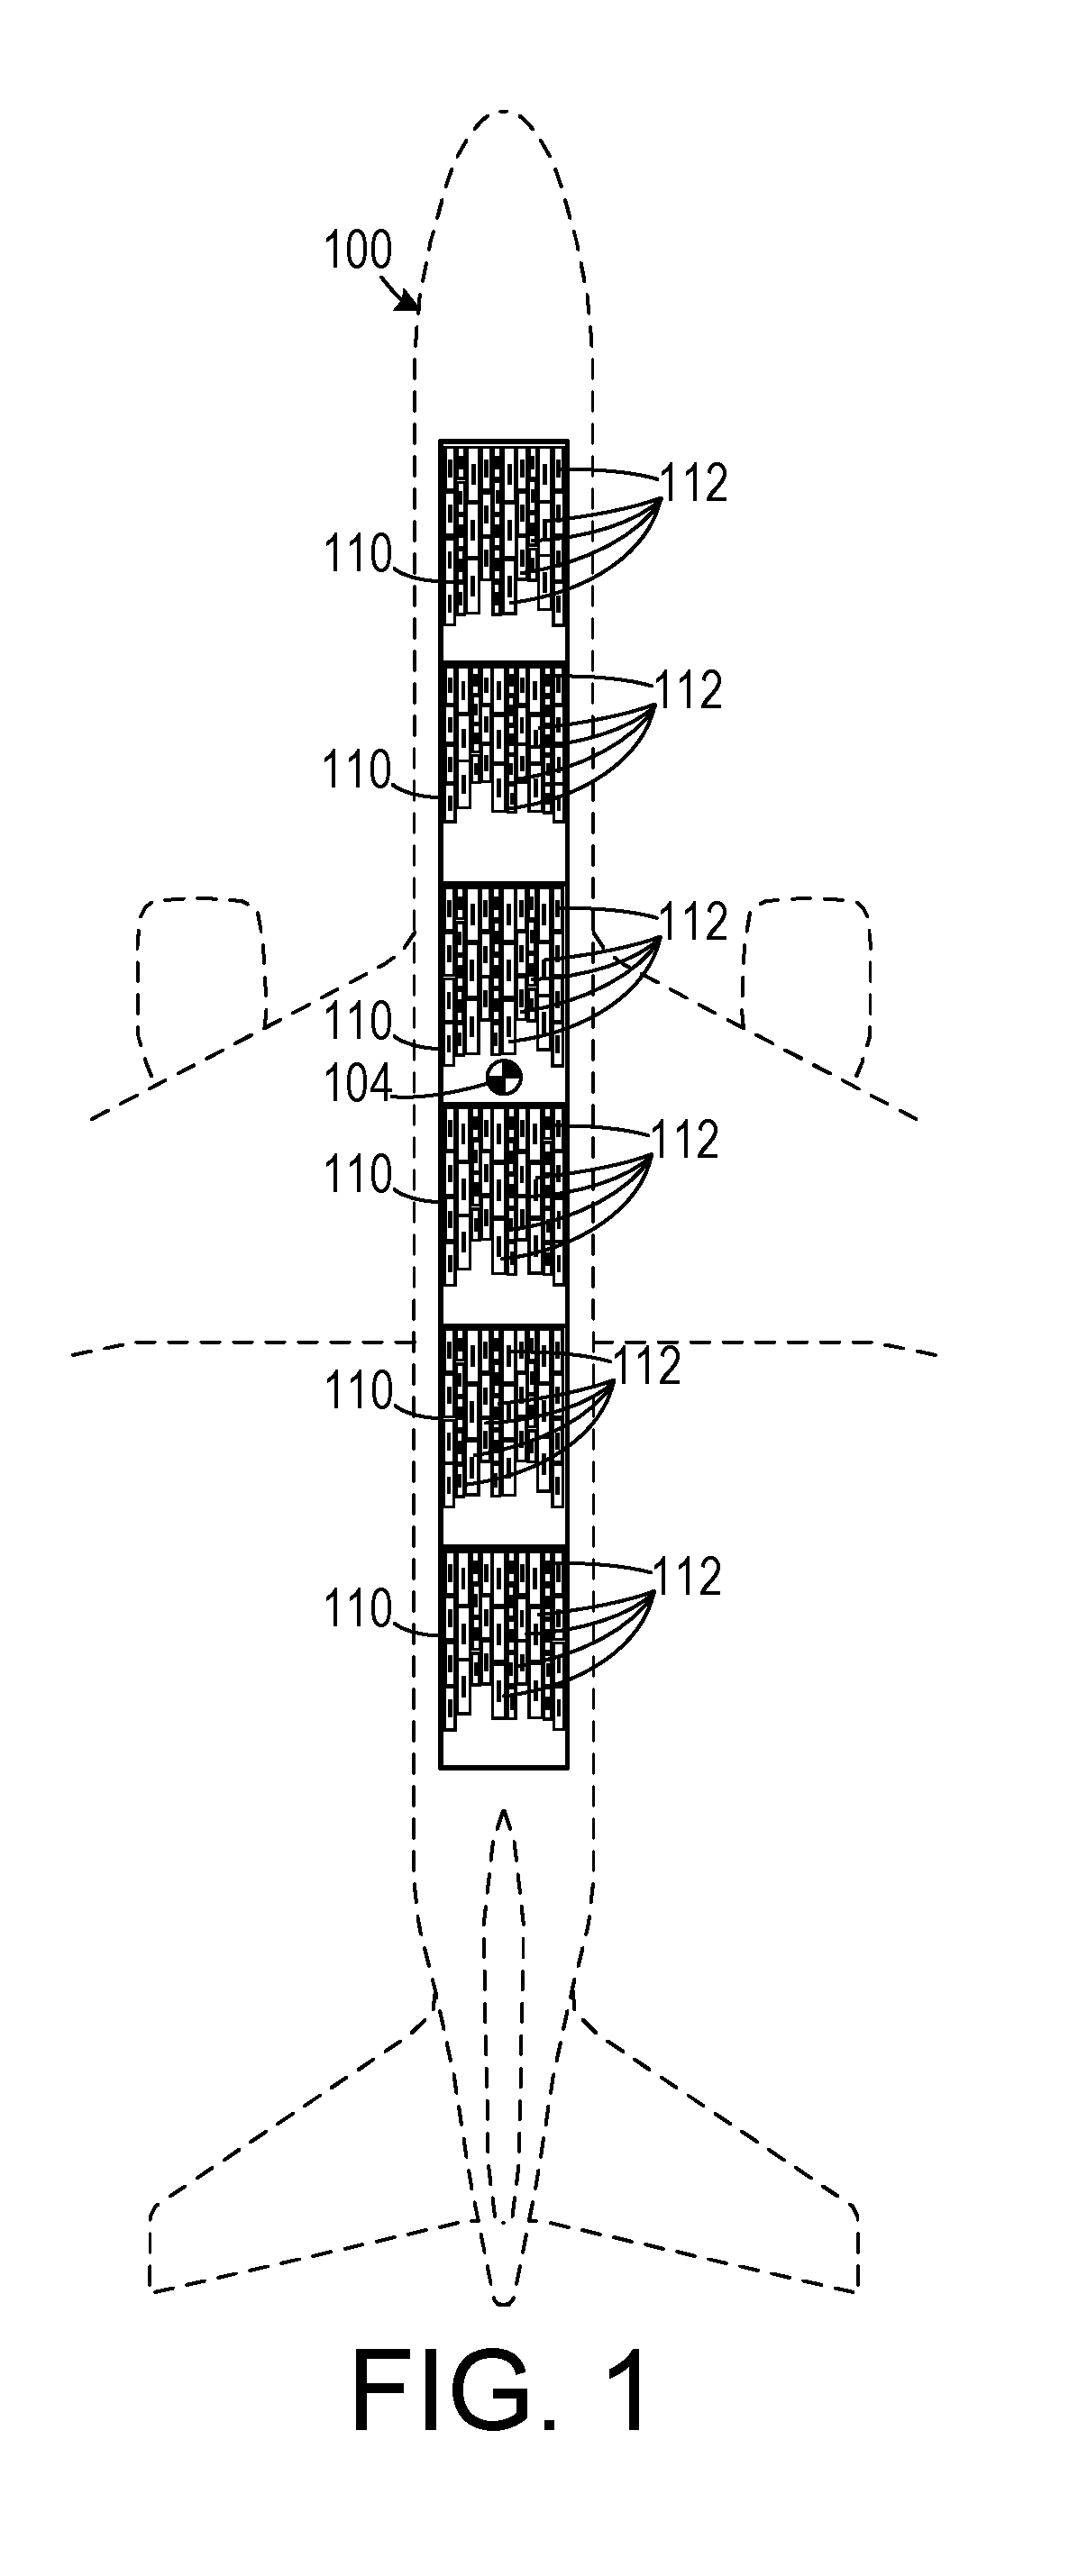 Method For Optimizing the Placement of Check-In Bags in Aircraft